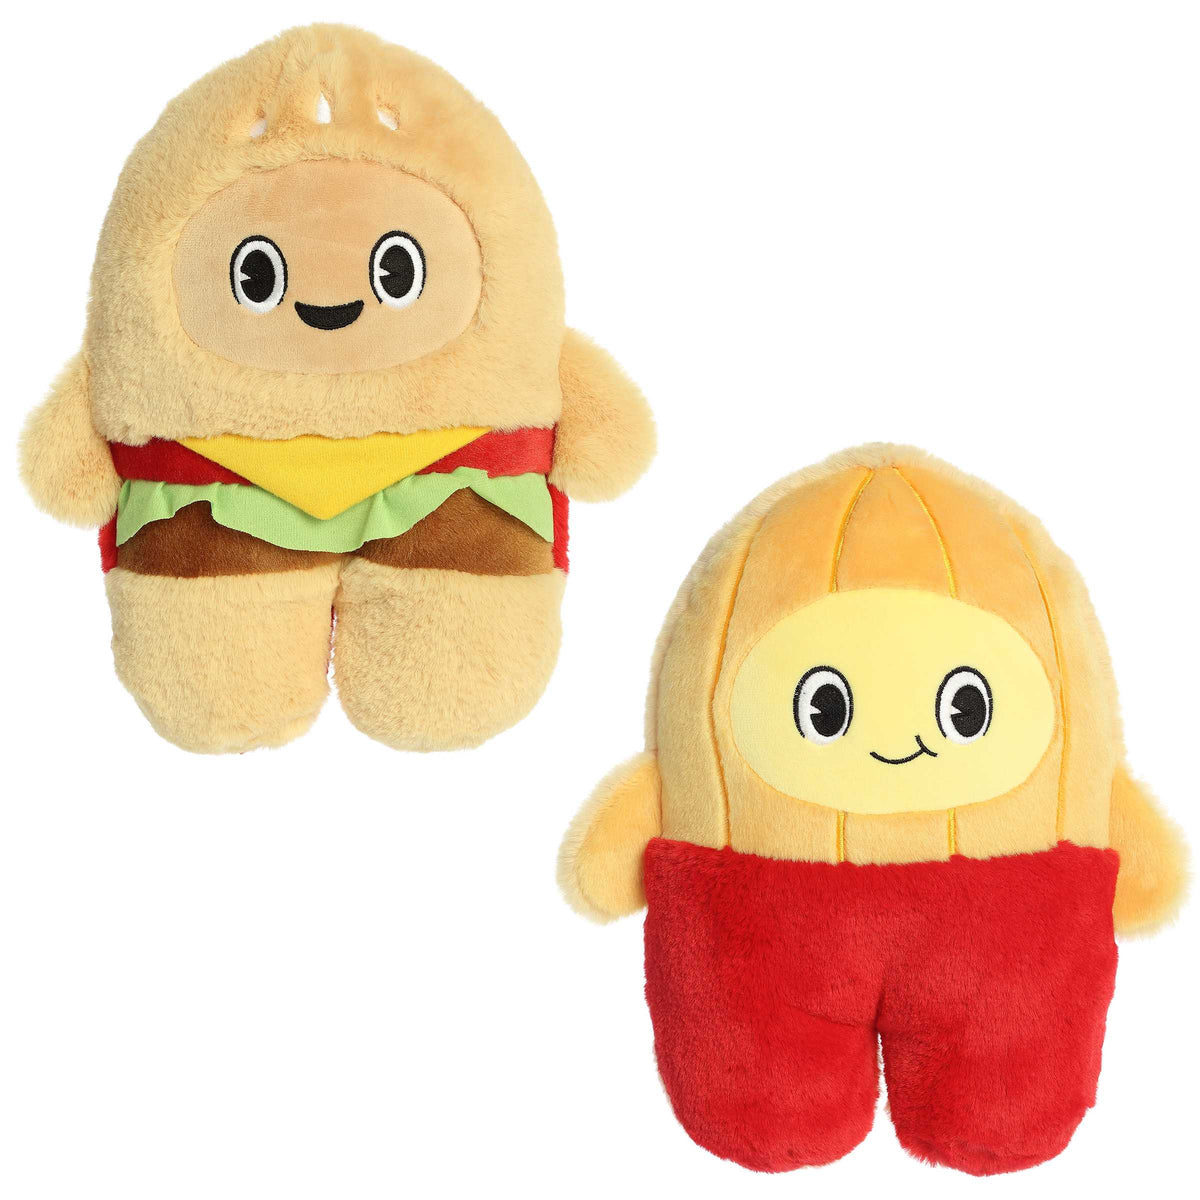 Dual Hamburger & Fries FlipOvers plush, flipping between a burger and fries, ideal for playful decor